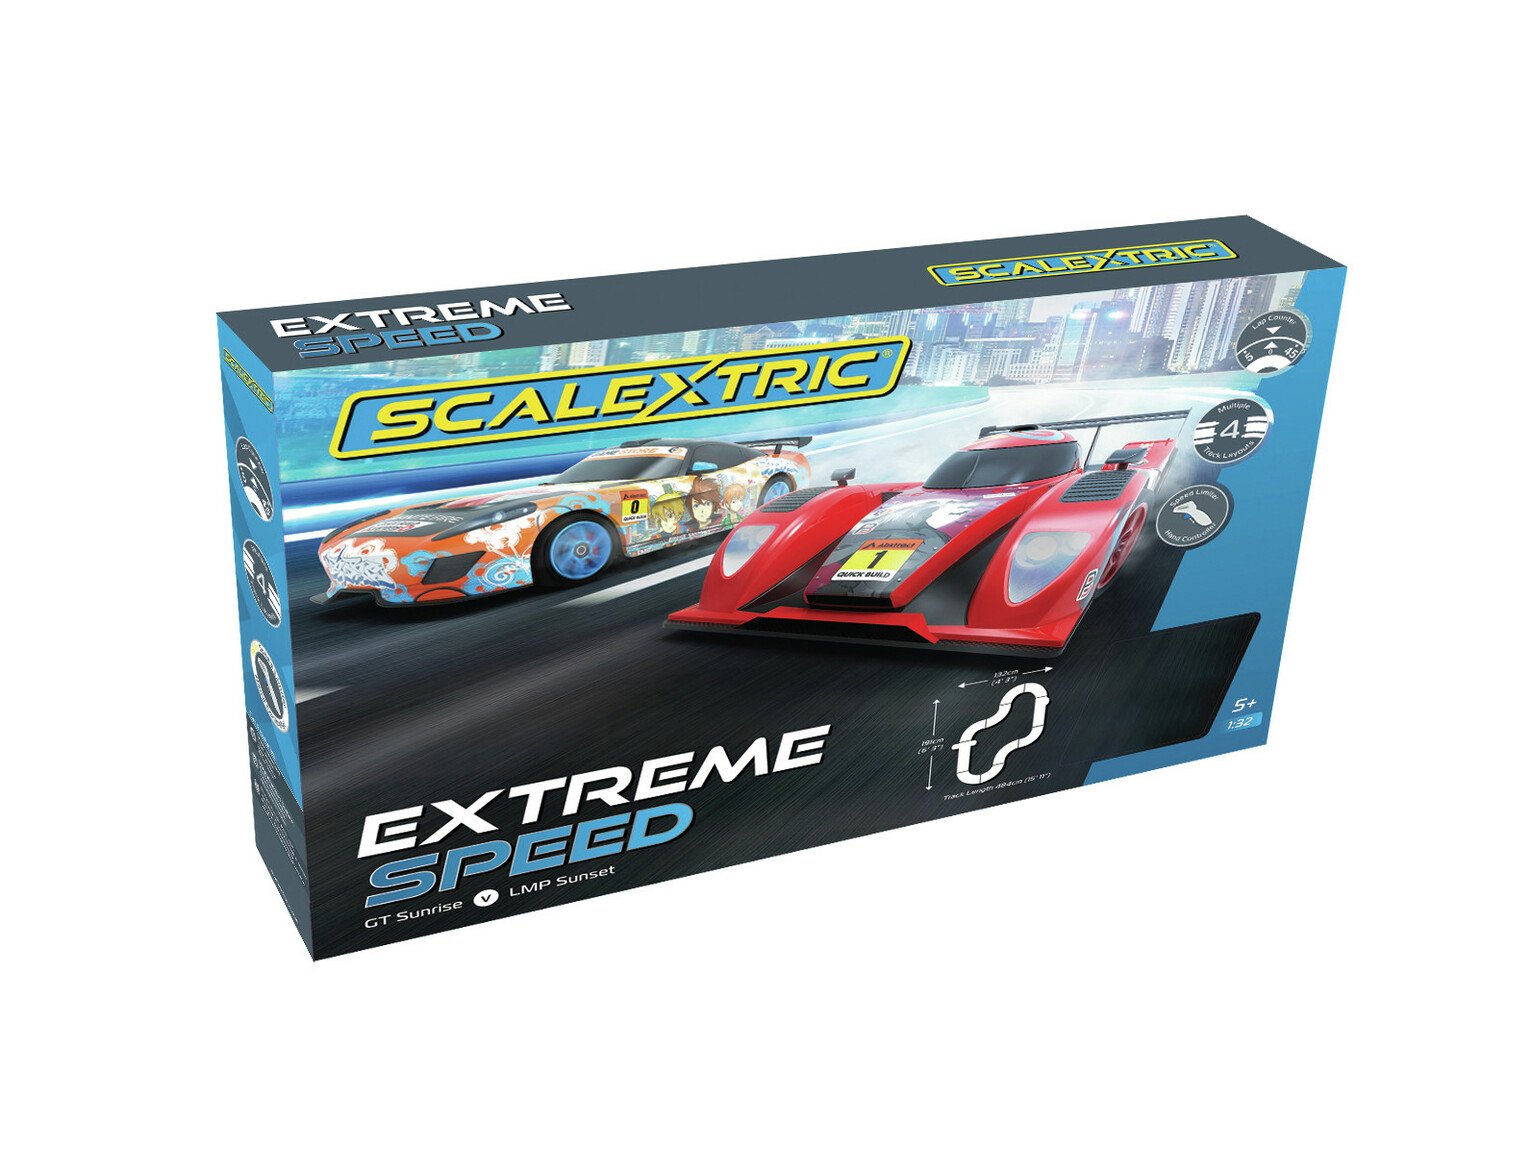 Scalextric Extreme Speed Set Review